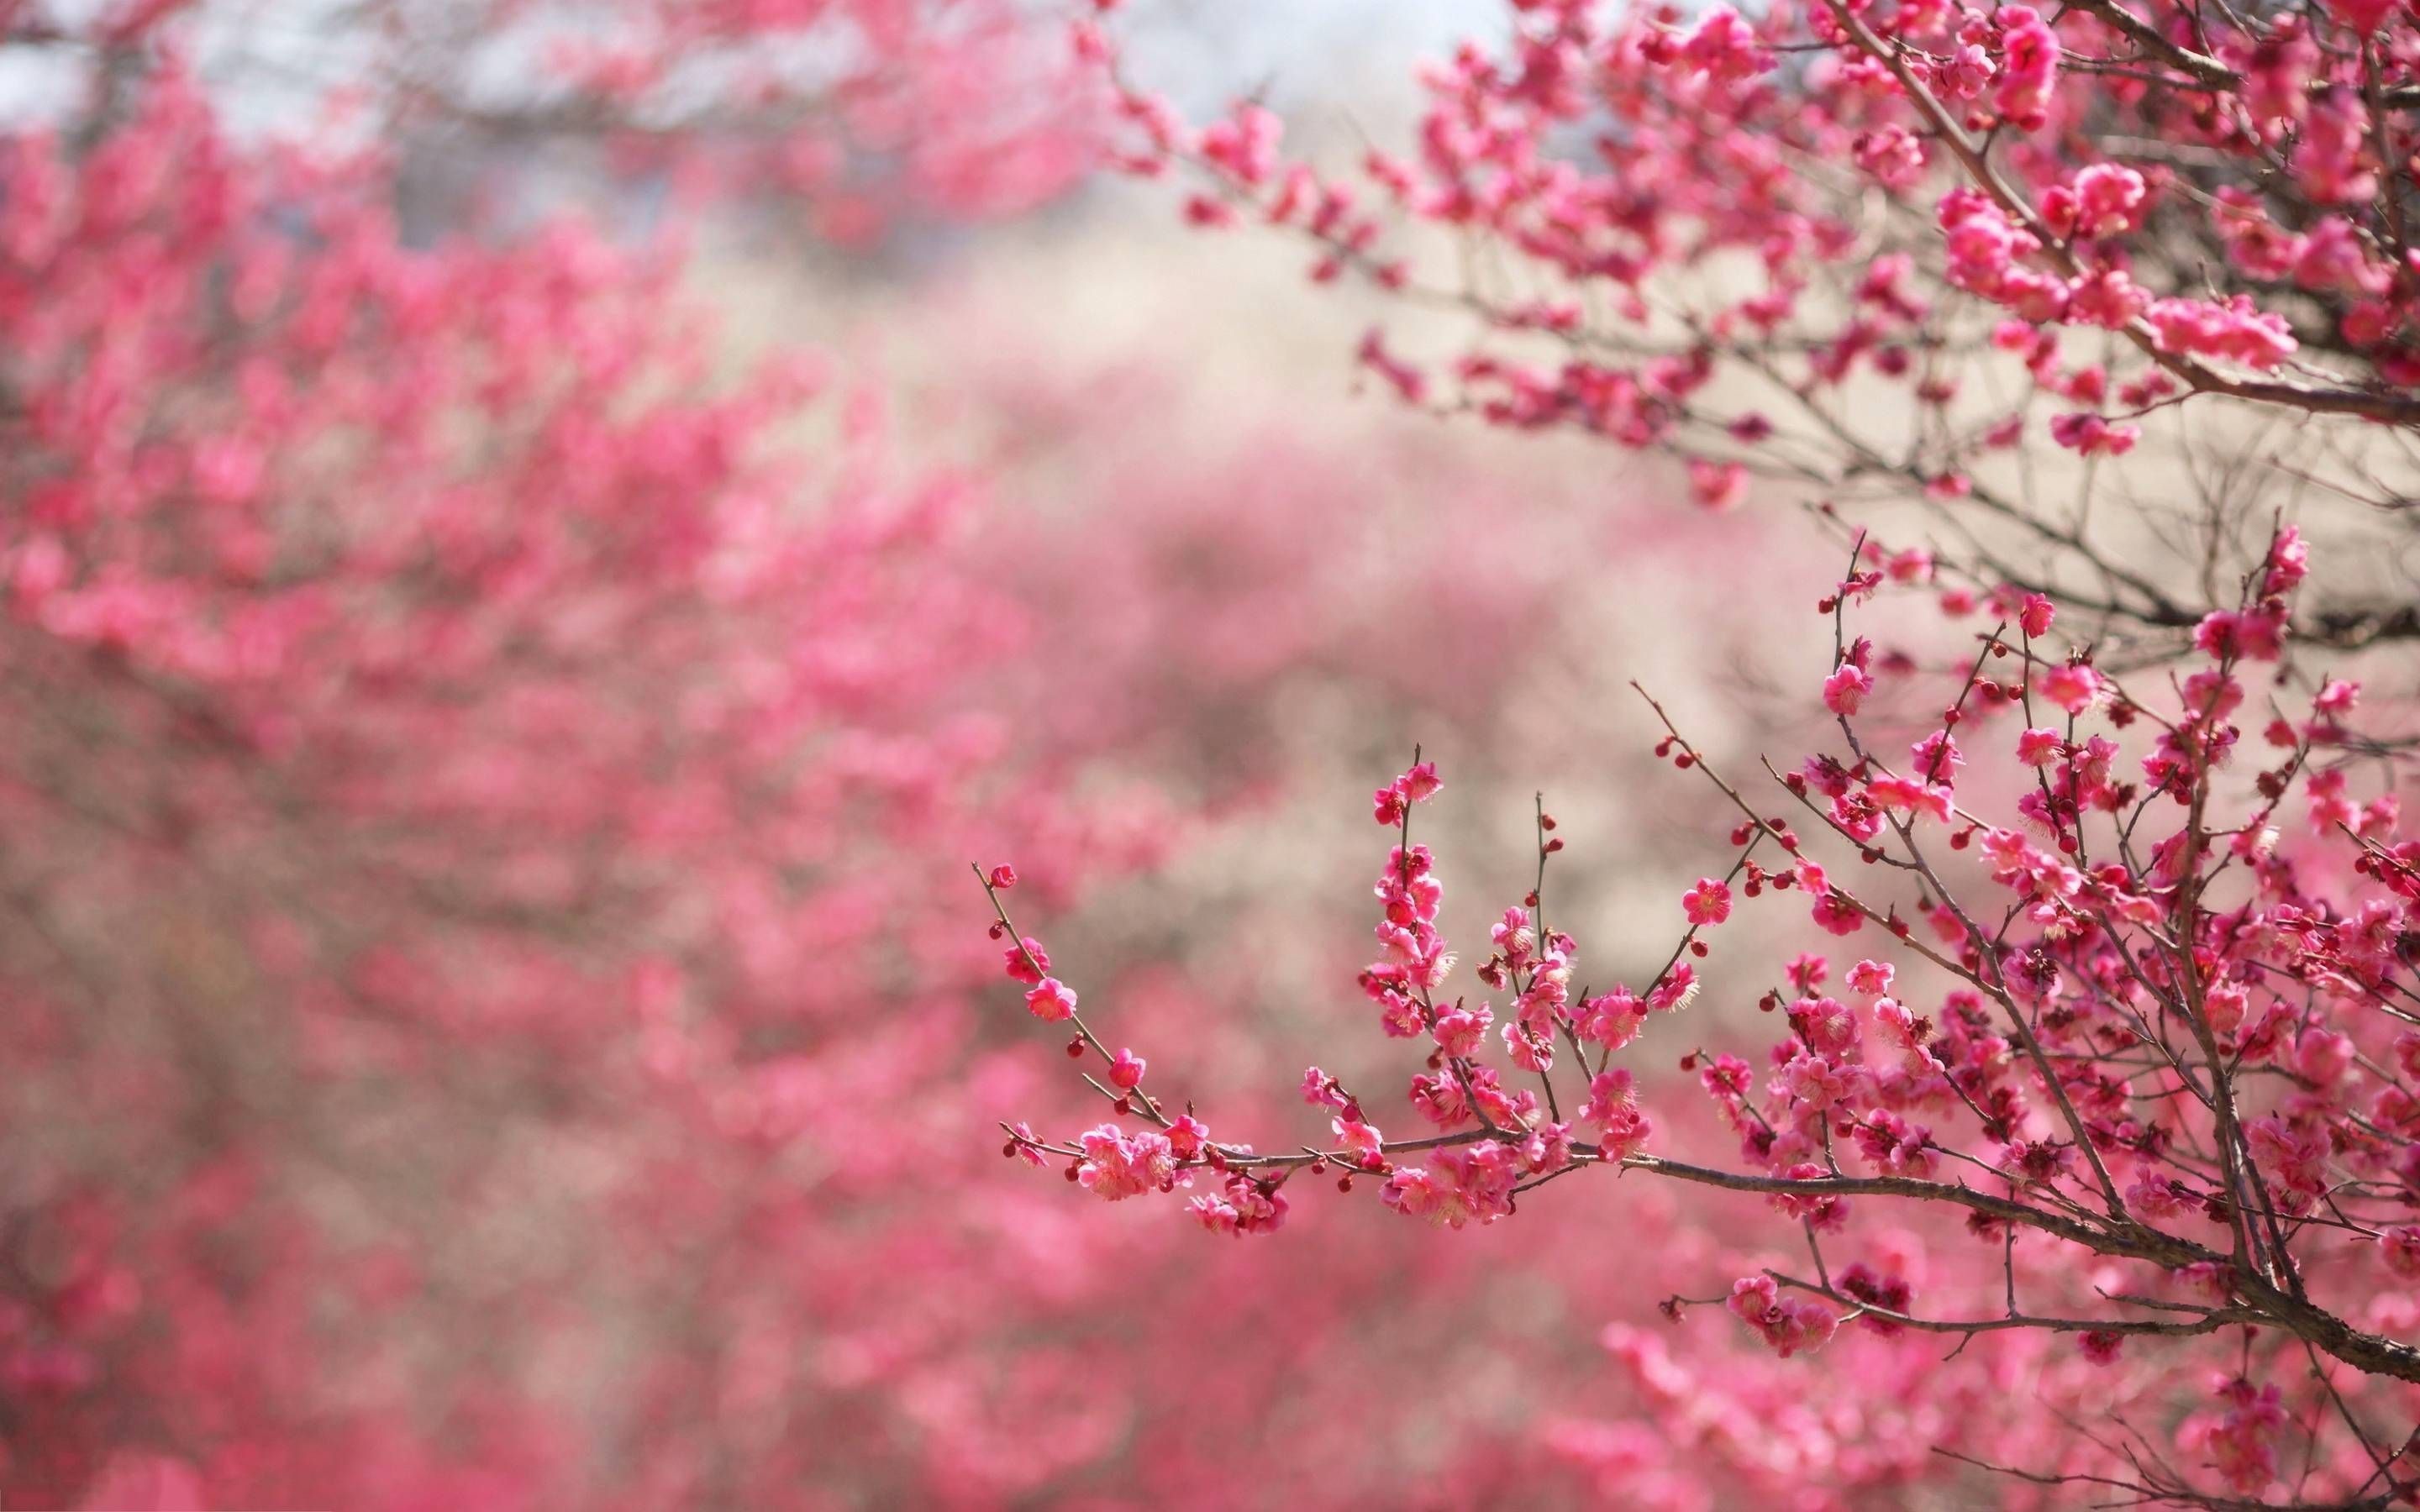 A branch of pink flowers - Cherry blossom, cherry